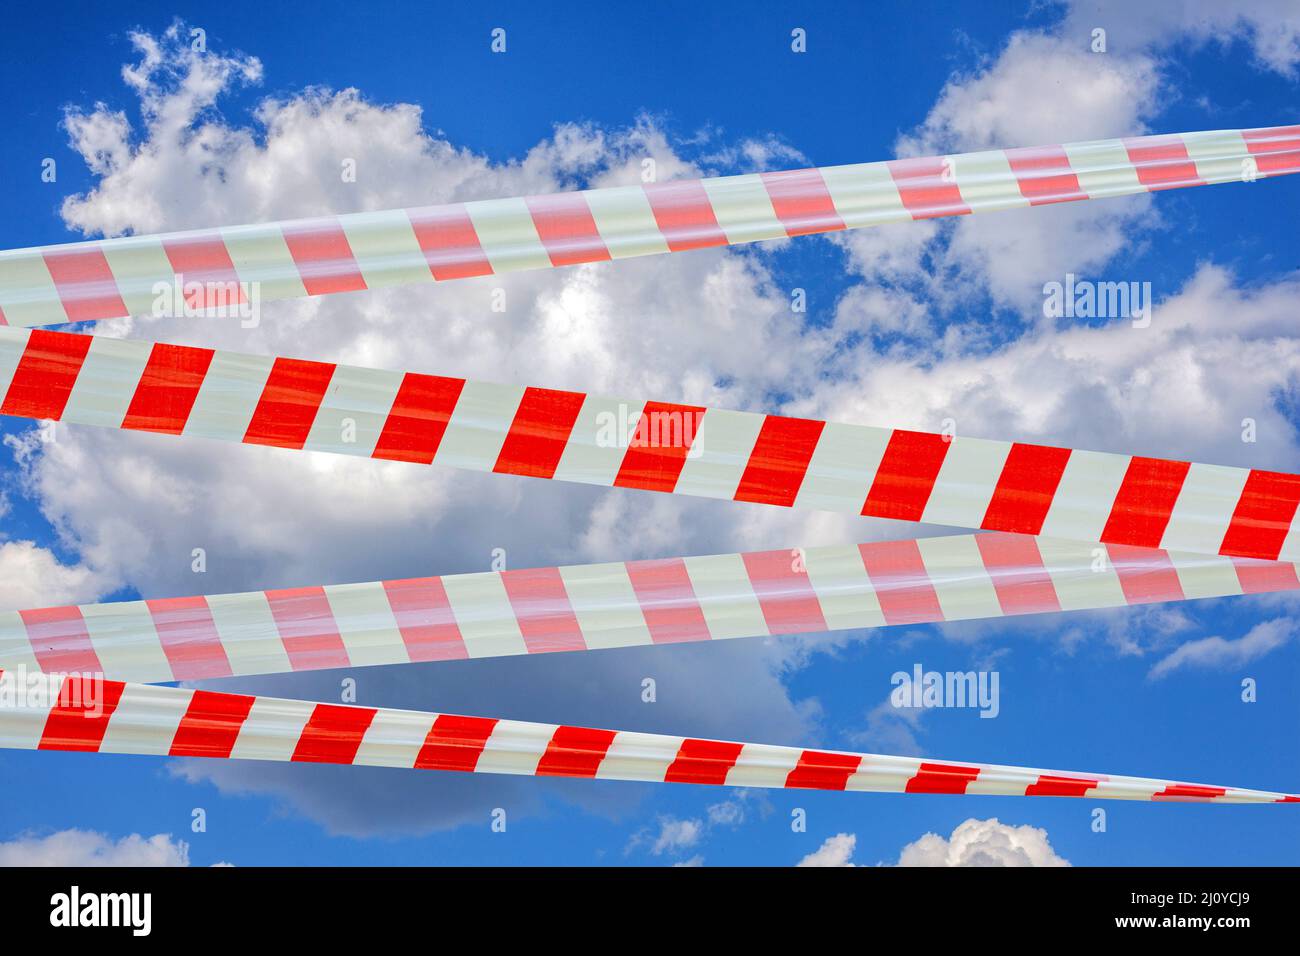 Sky is covered with barrier tape. Ban on flights due to quarantine. Stock Photo